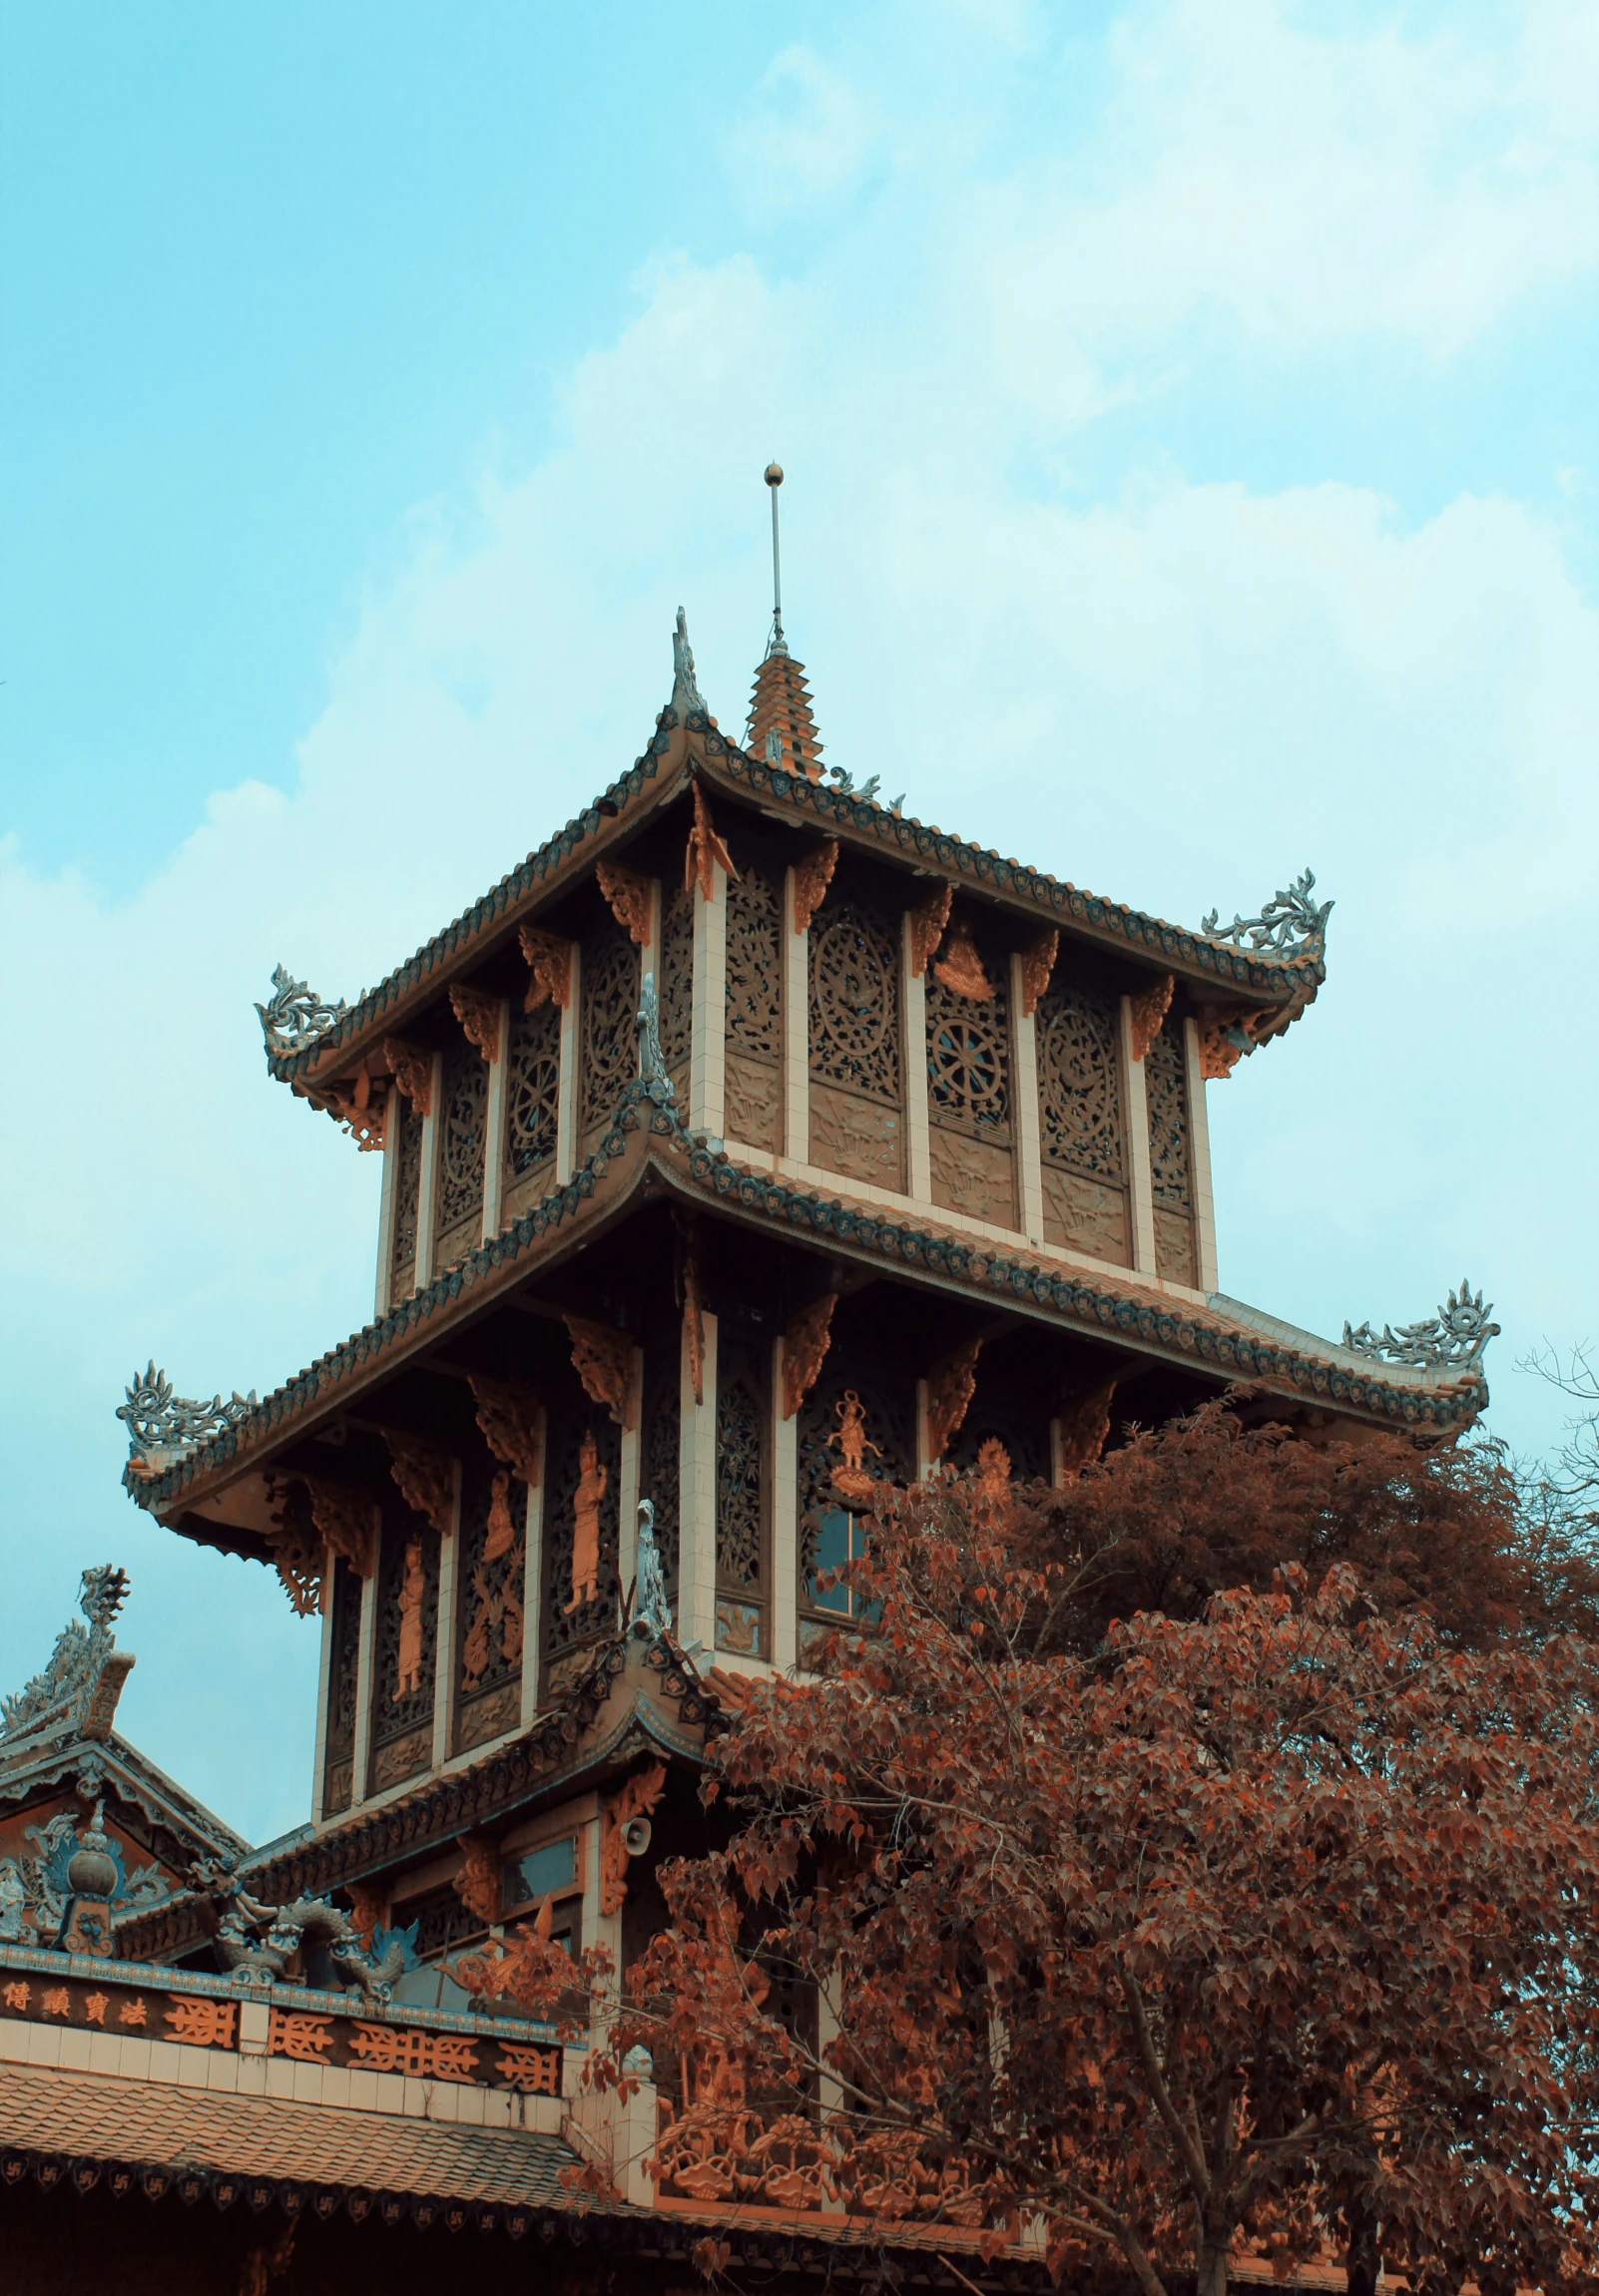 an oriental - inspired building sits upon the sky on a sunny day